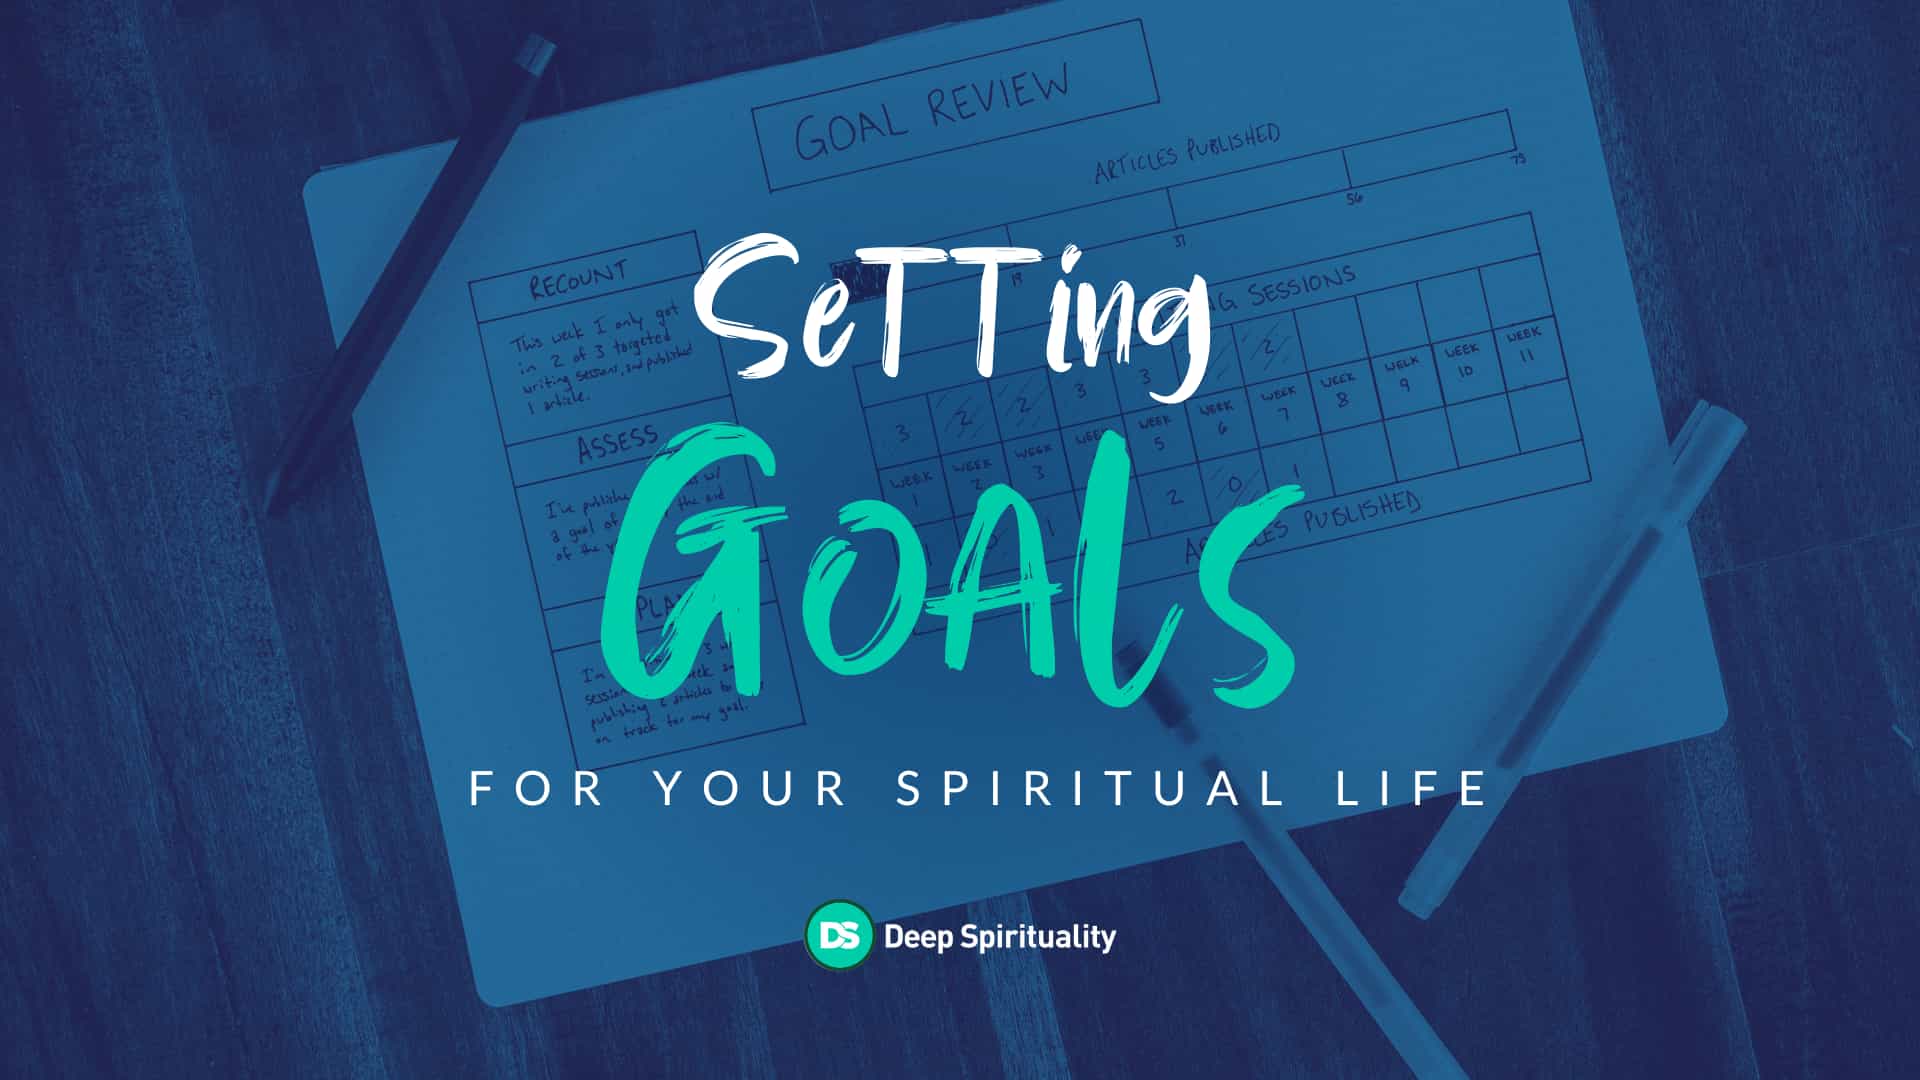 How to Set Goals for Your Spiritual Life 4